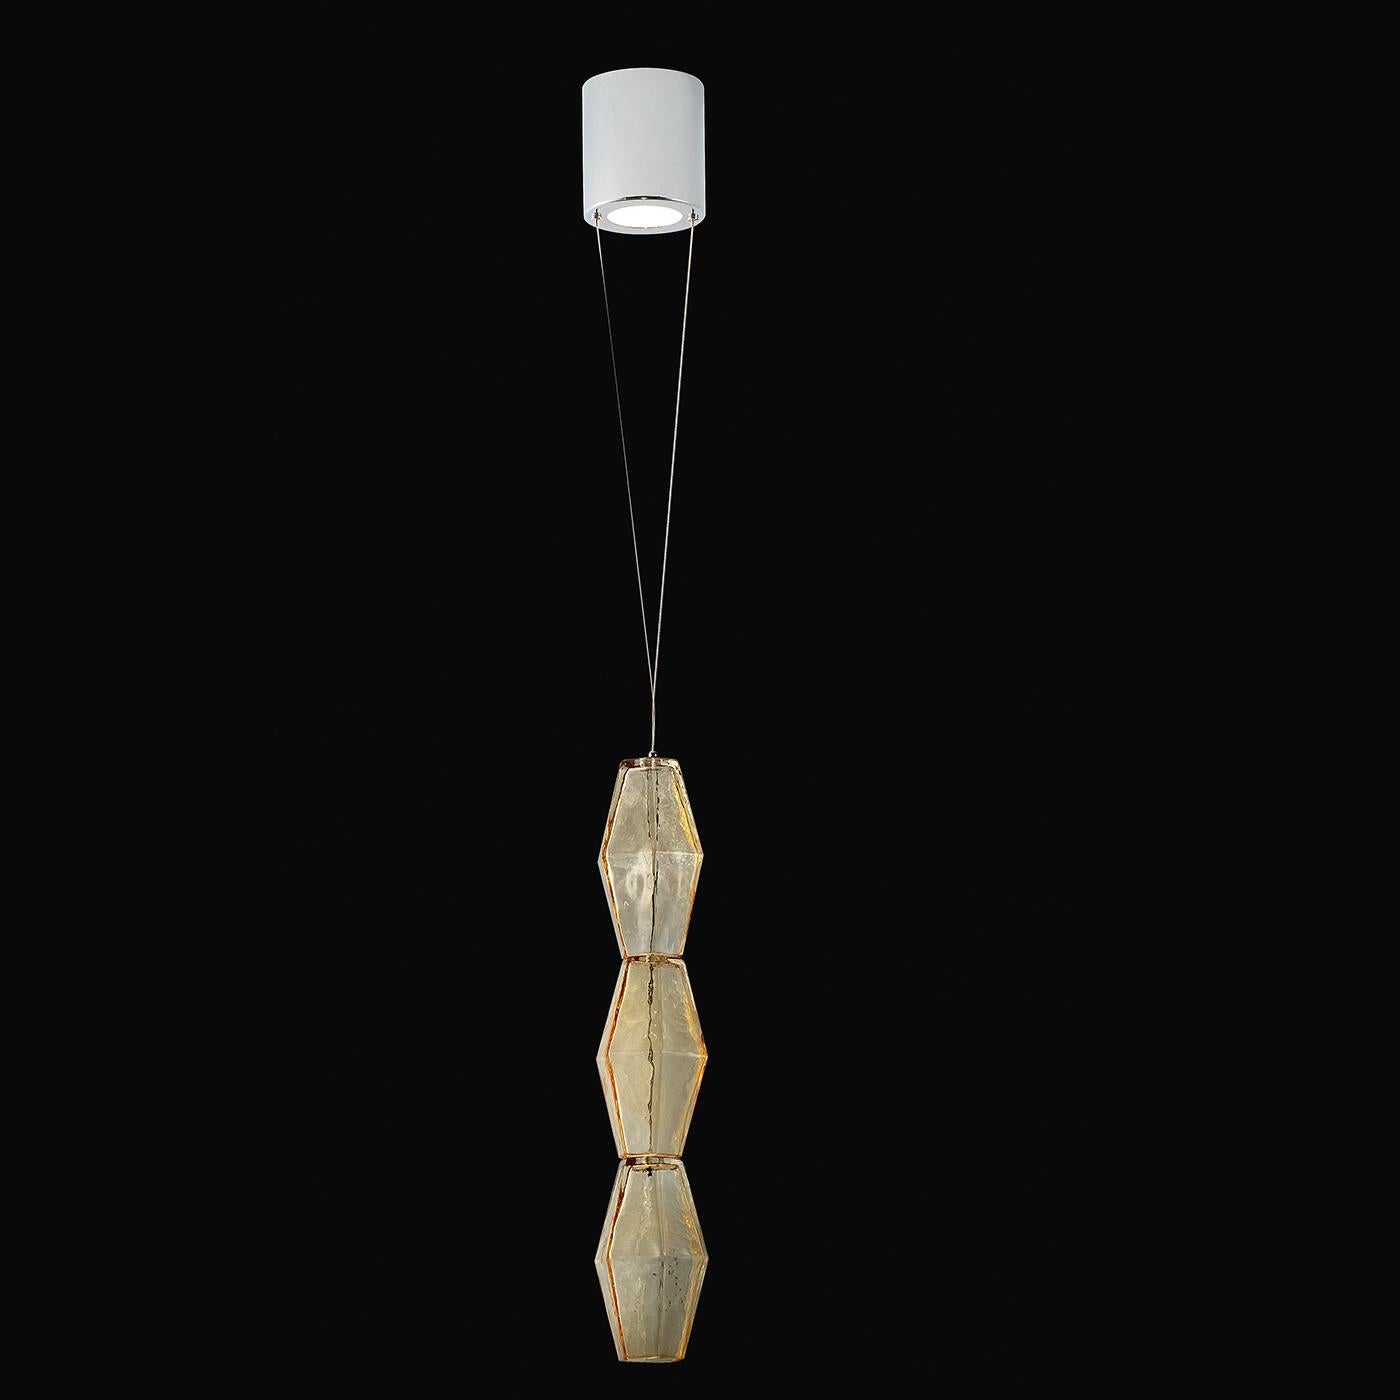 In a simple and artistic design, this suspension lamp features a hand blown colored glass pendant in three geometric shaped sections. The lamp is housed in the canopy with a polished chrome or 24-karat gold finish and this highly original suspension